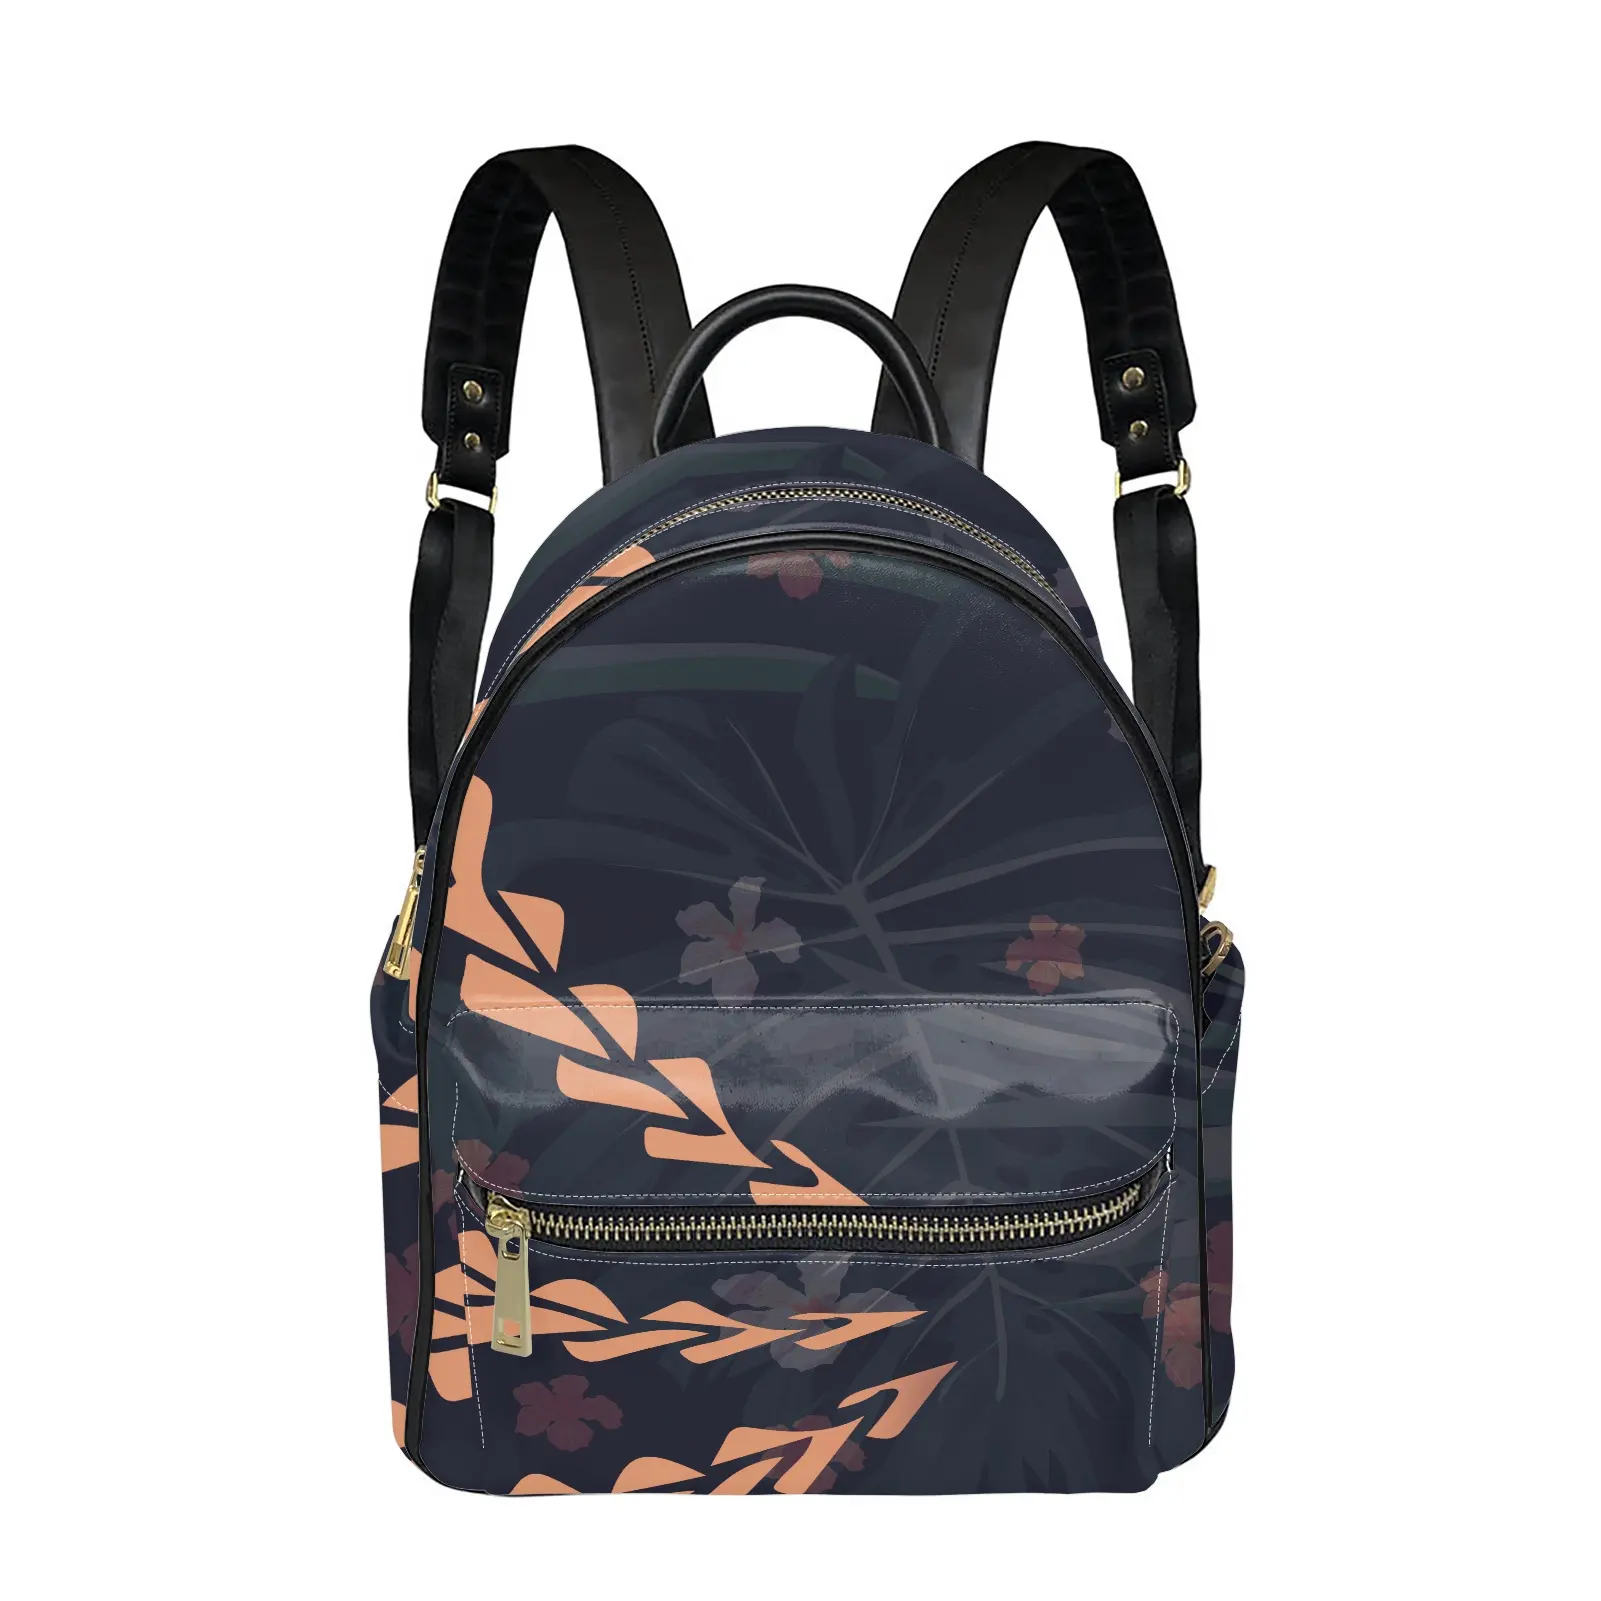 High-quality Pu Backpack Waterproof For Women Hawaii Polynesian Pattern Leather Purse Backpack Girl School Bags With zip Pockets